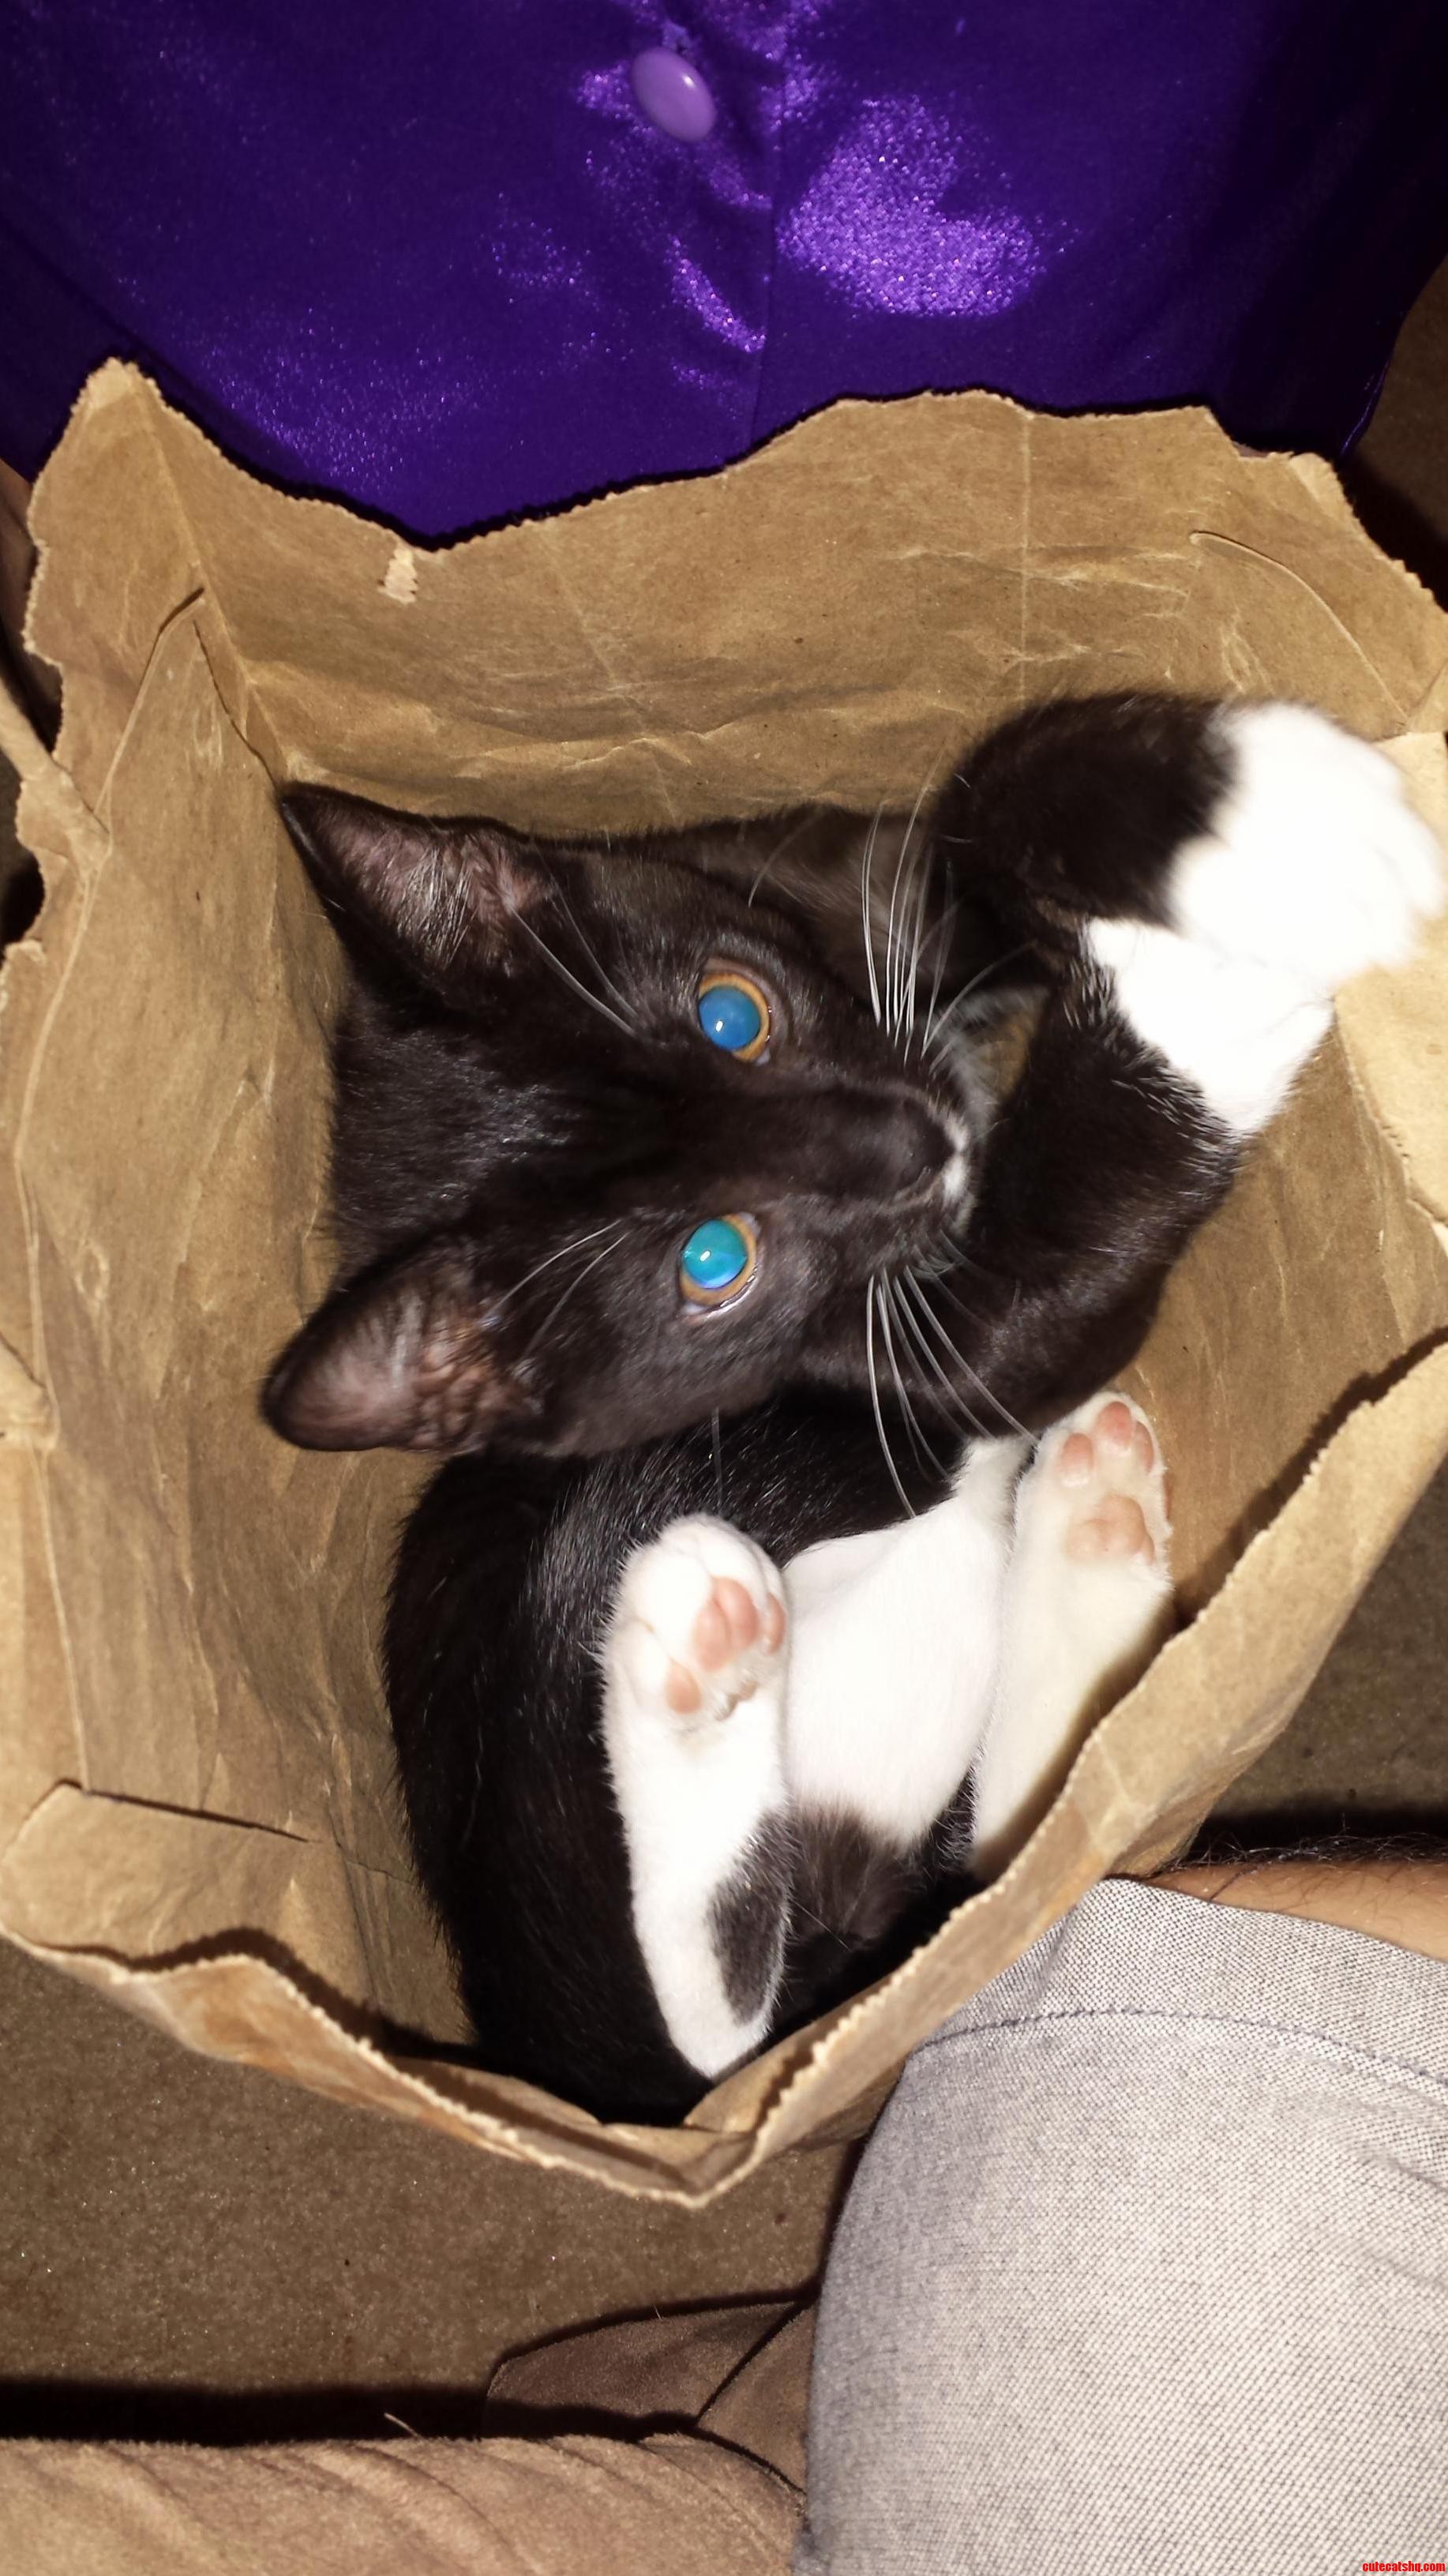 This Is Allan Hes In A Bag